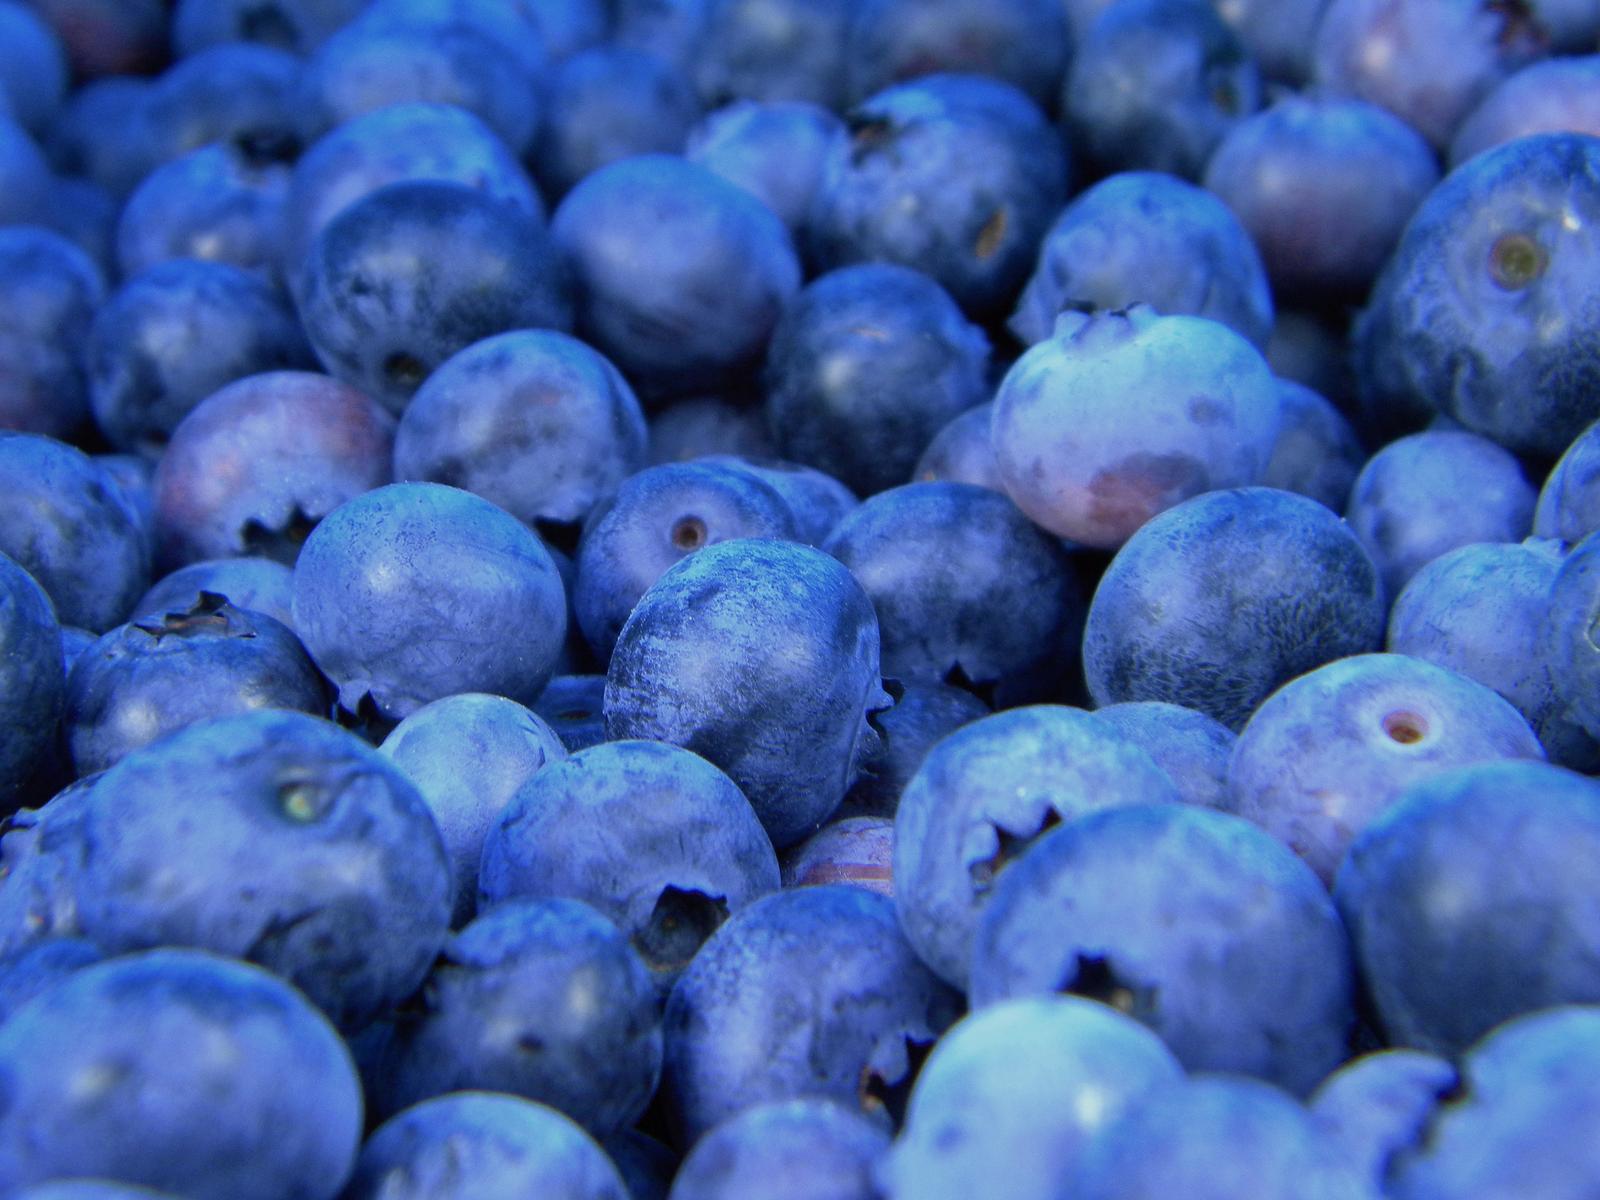 These Are the 🥑 Healthiest Foods in the Human Diet, According to AI. 🍄 How Many Have You Been Eating? Blueberries